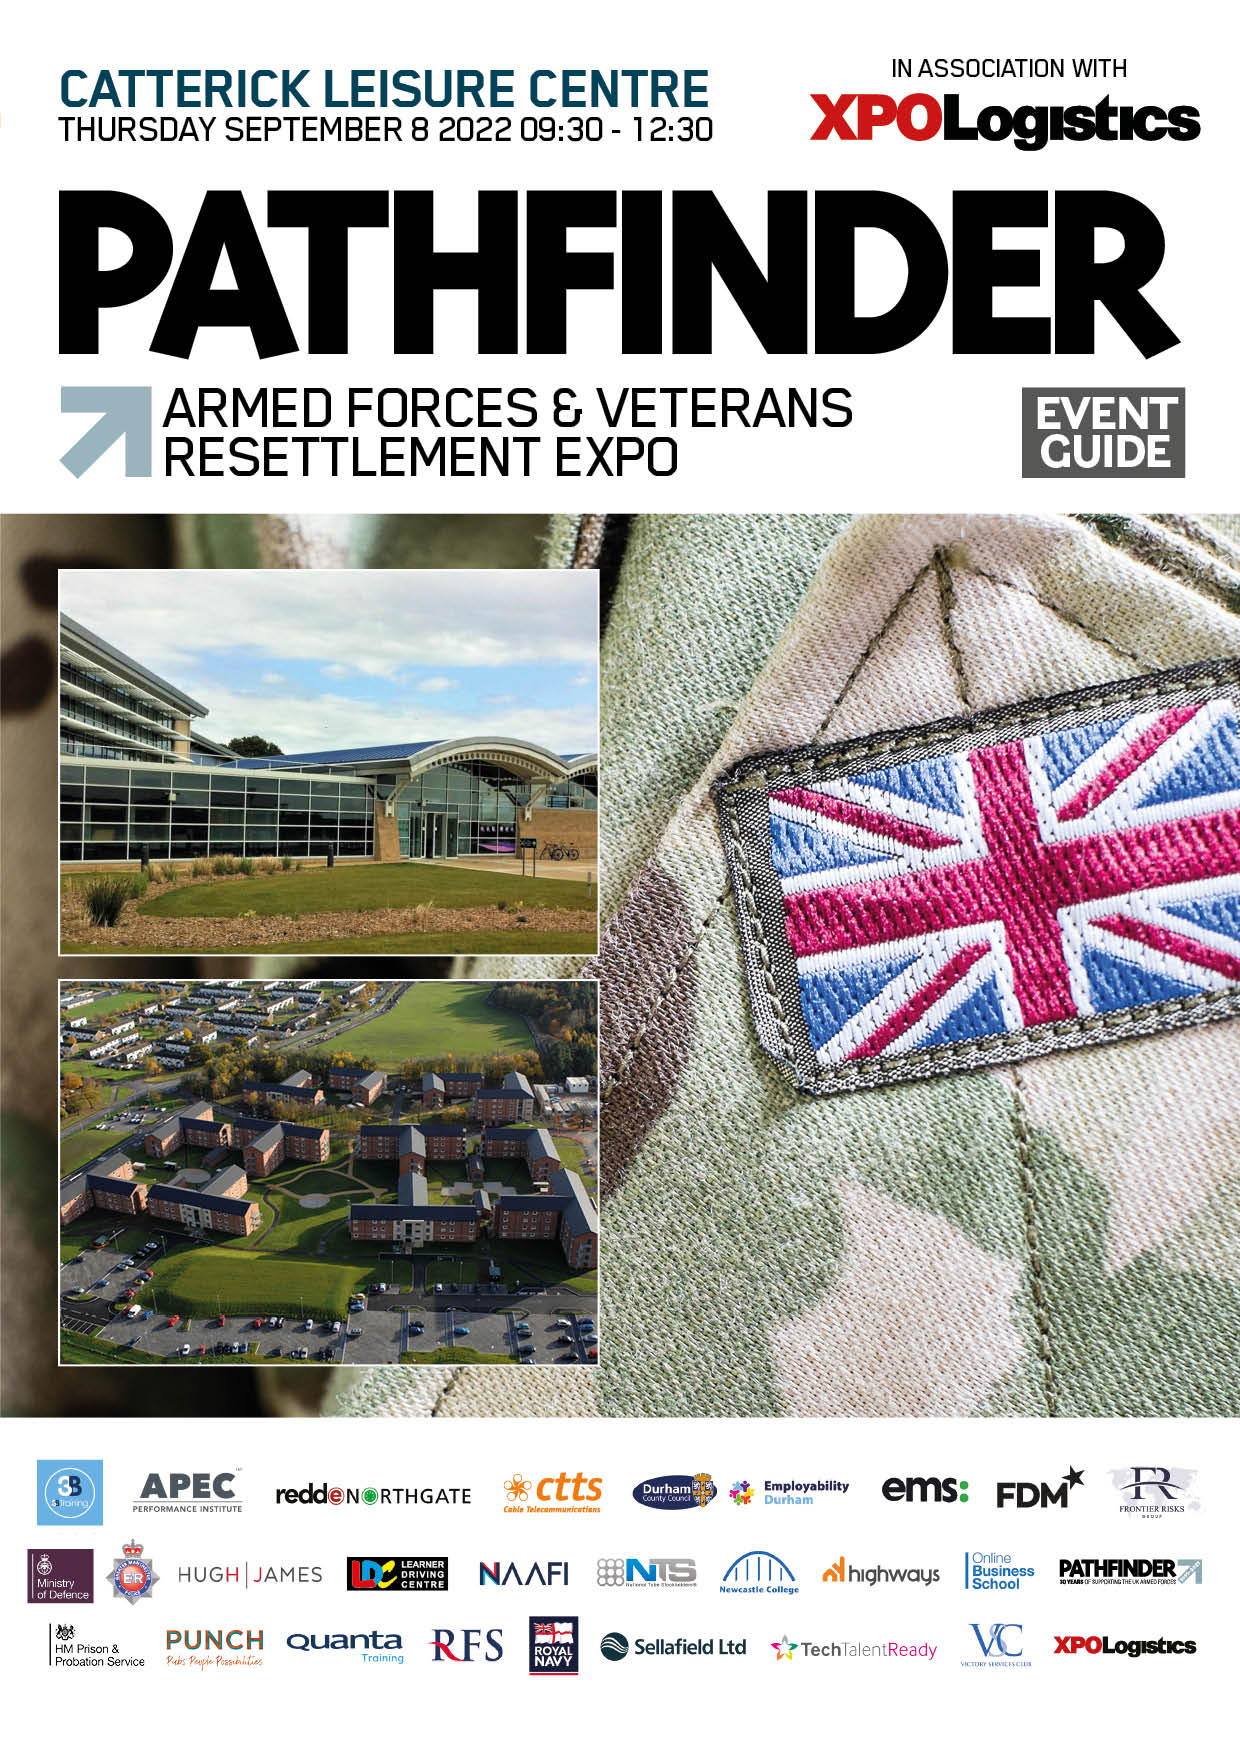 Armed Forces Expo Catterick – Meet The Exhibitors – Quanta Training